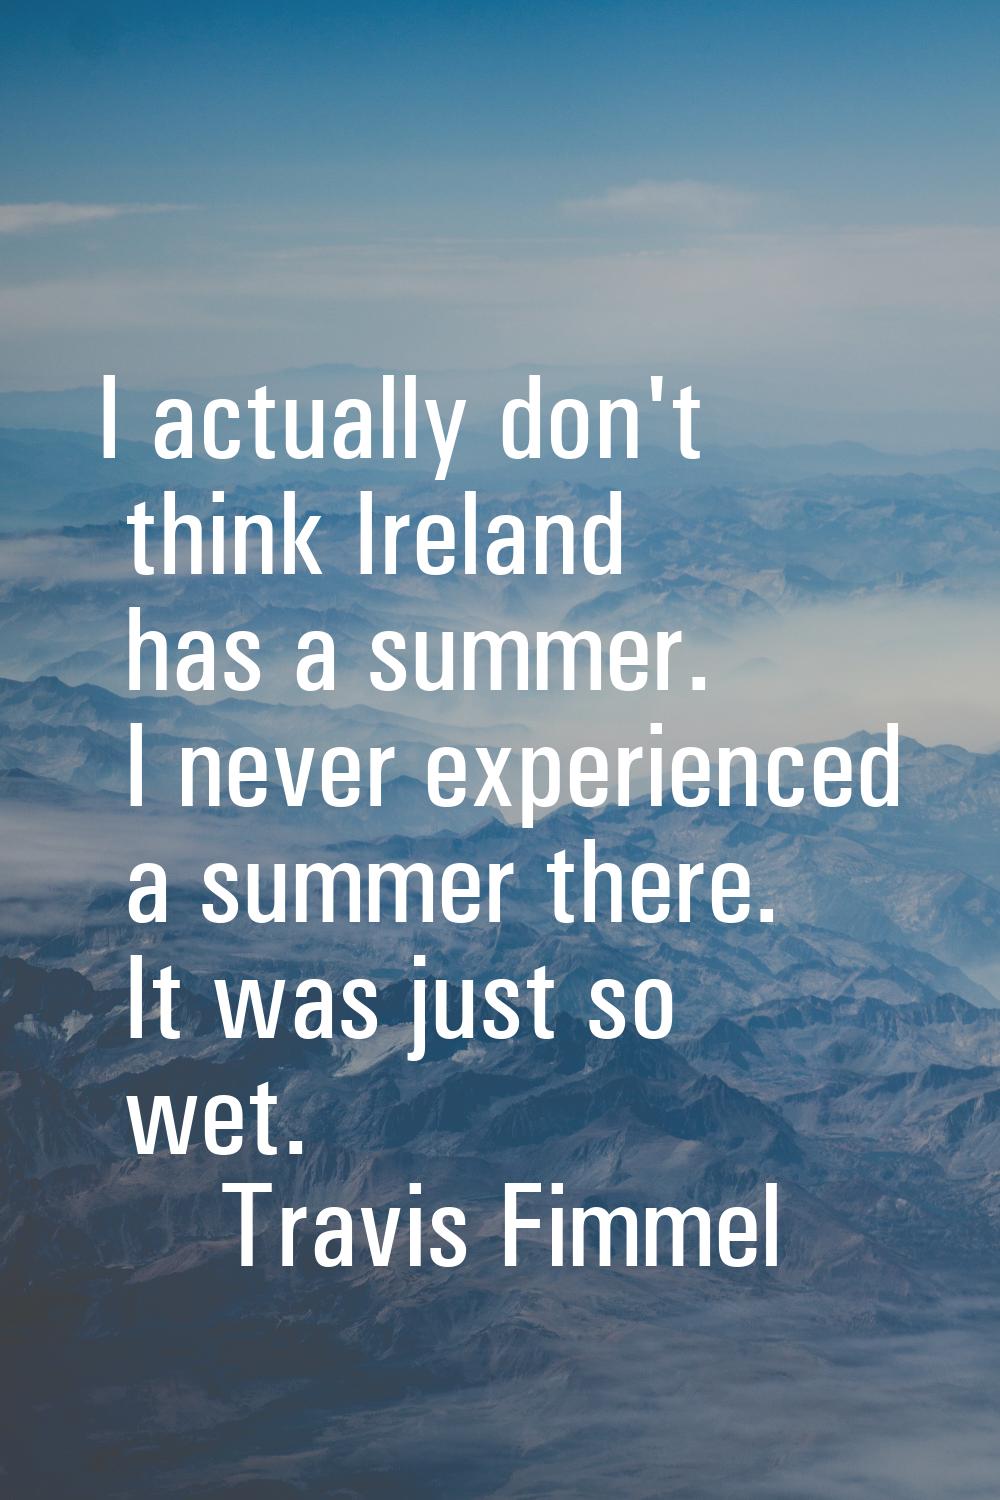 I actually don't think Ireland has a summer. I never experienced a summer there. It was just so wet